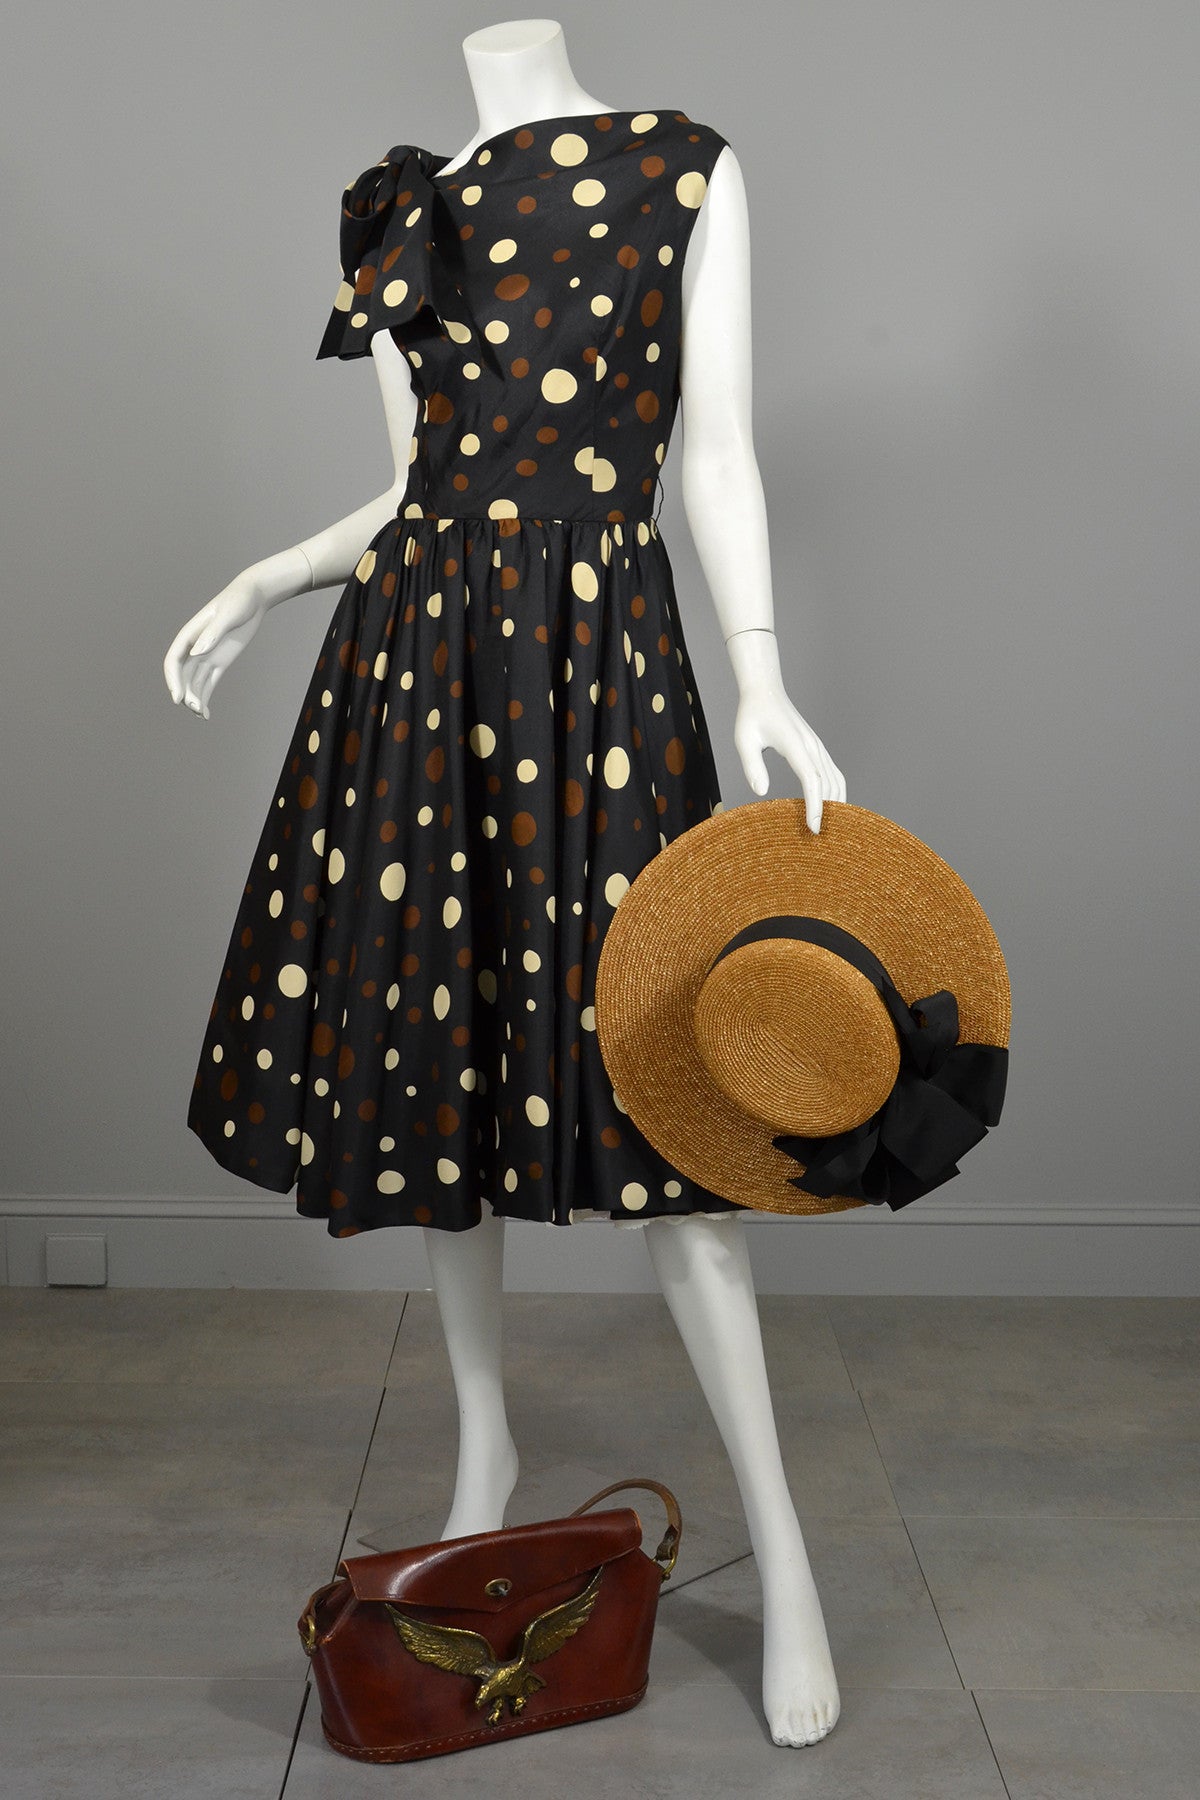 Coming! Vintage 1960s Polka Dot Kitten Bow Fit and Flare Dress